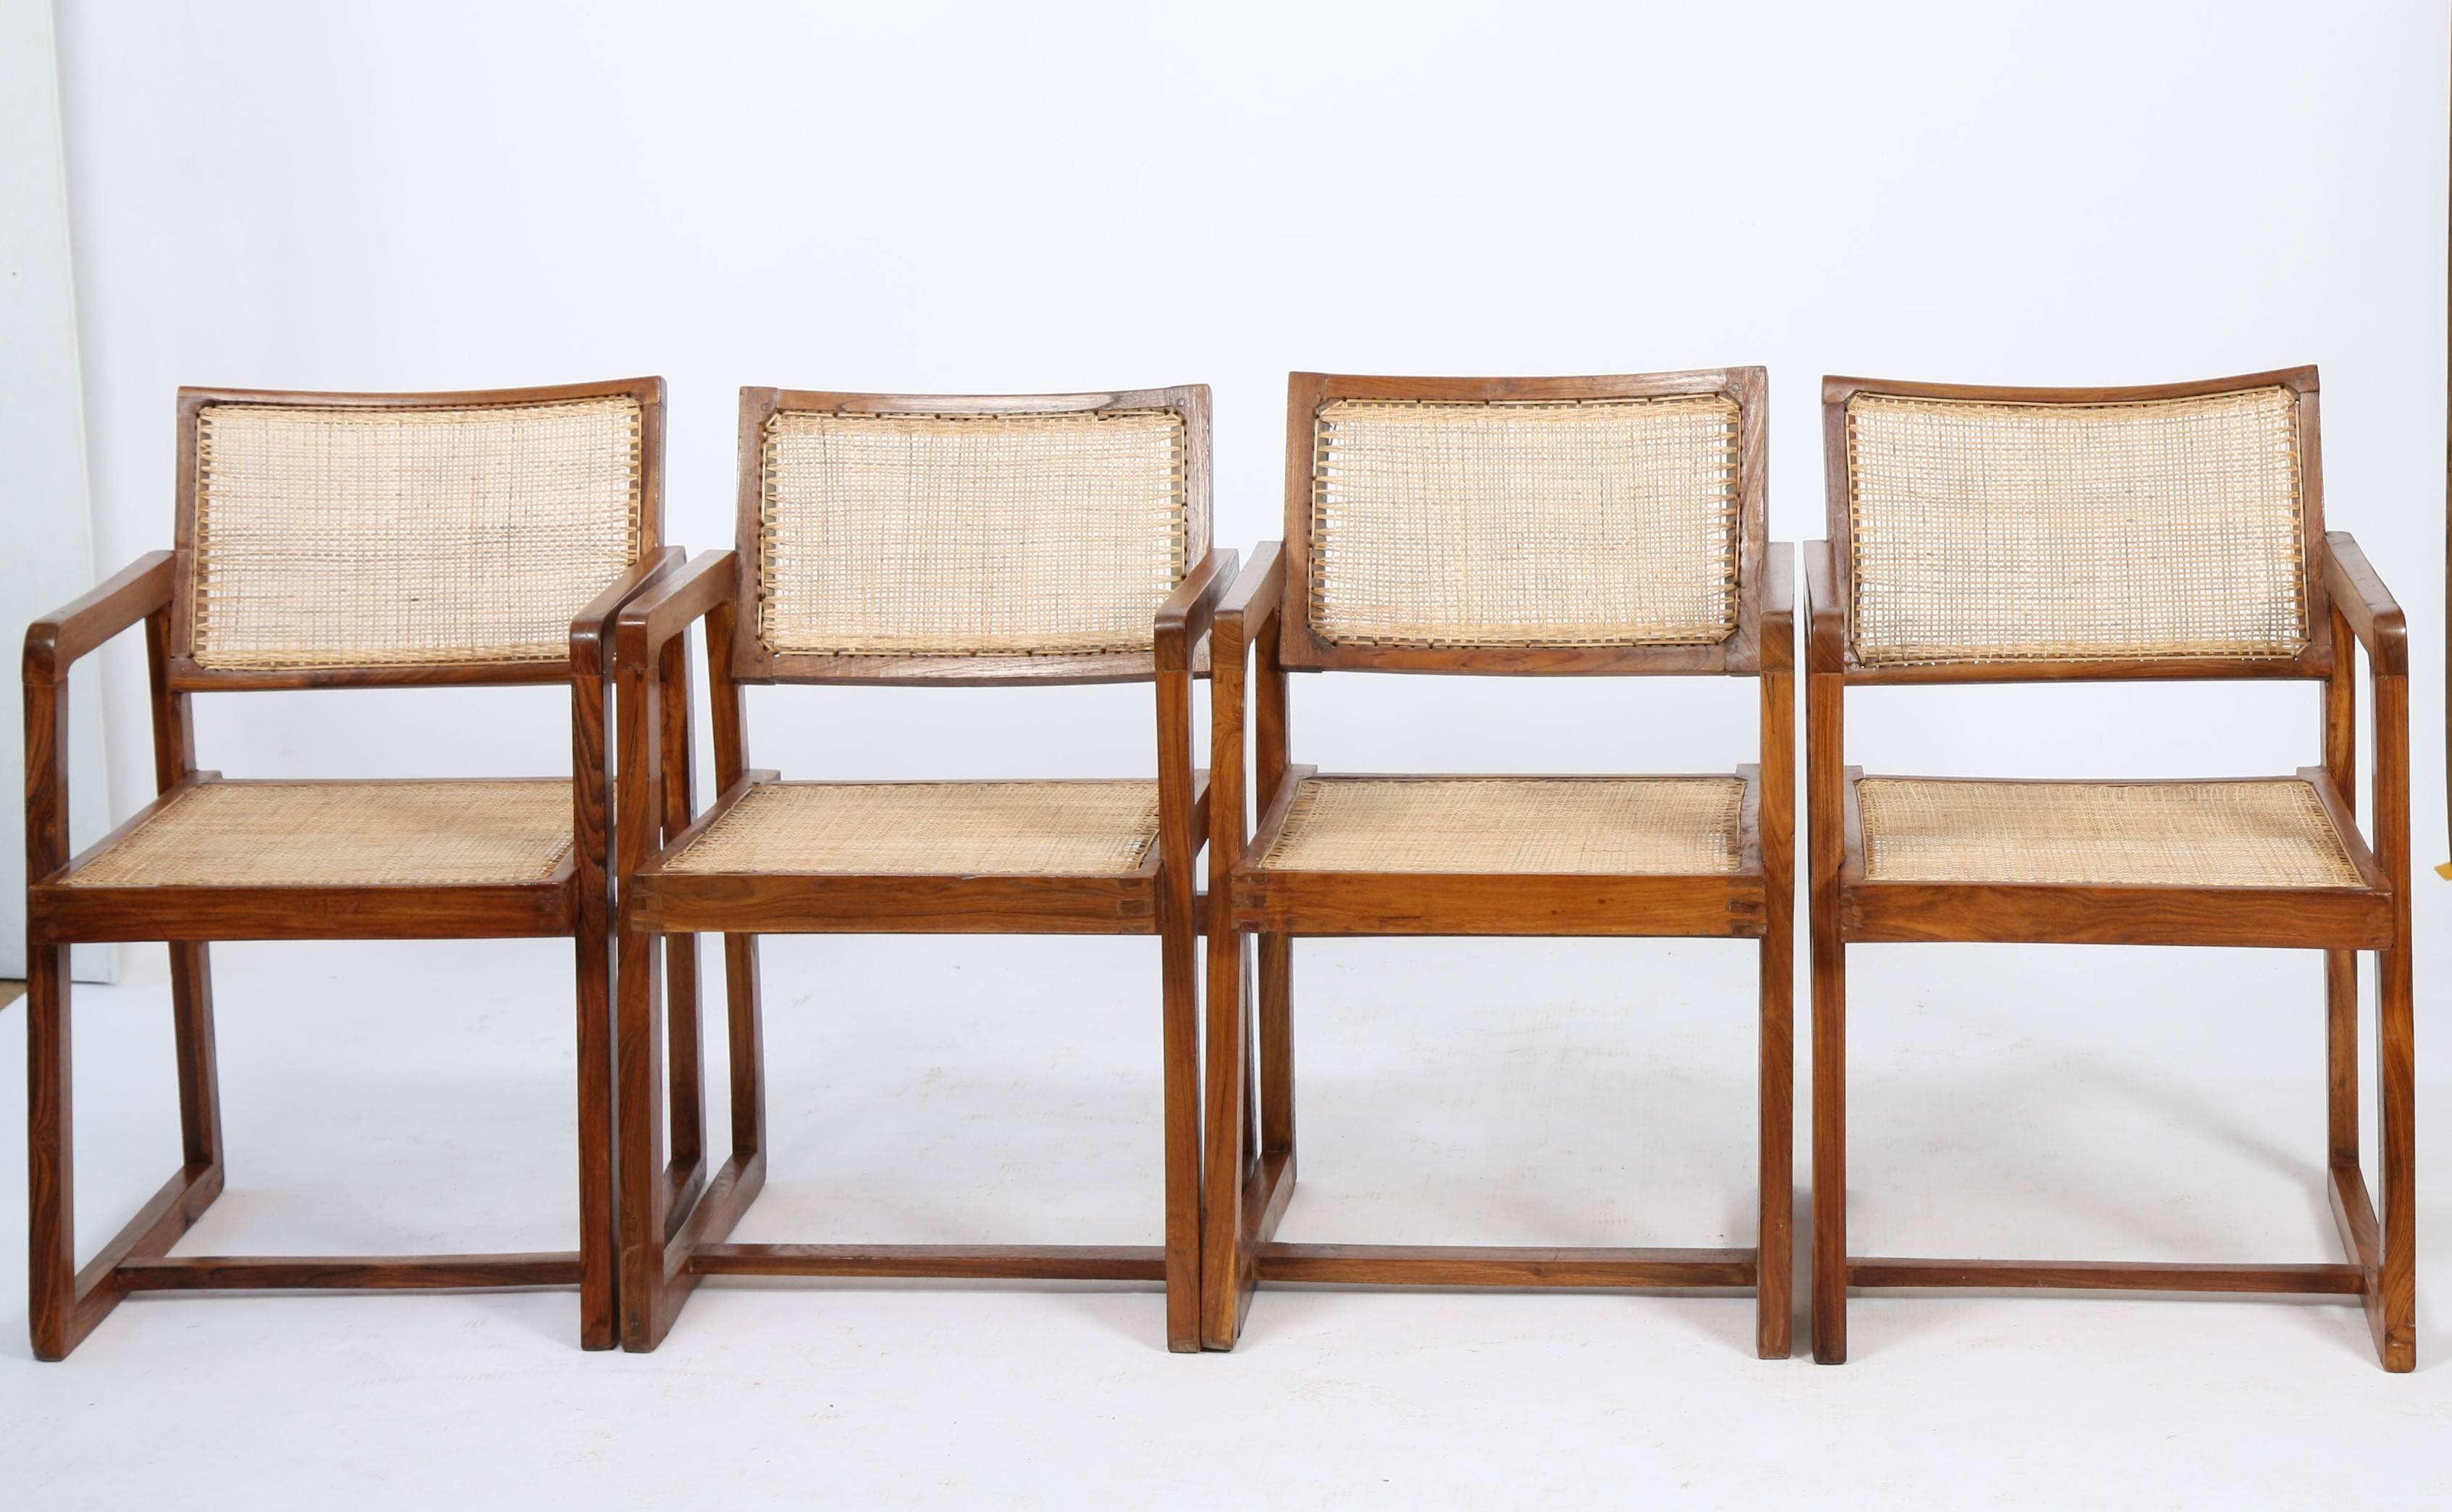 Pierre Jeanneret (1896-1967).
Set of four armchairs "Cane seat back office chair" in solid teak.
Double lateral legs "asymmetric framework", linked with two armrests crossbars.
Inclined and slightly curved backrest.
Restored